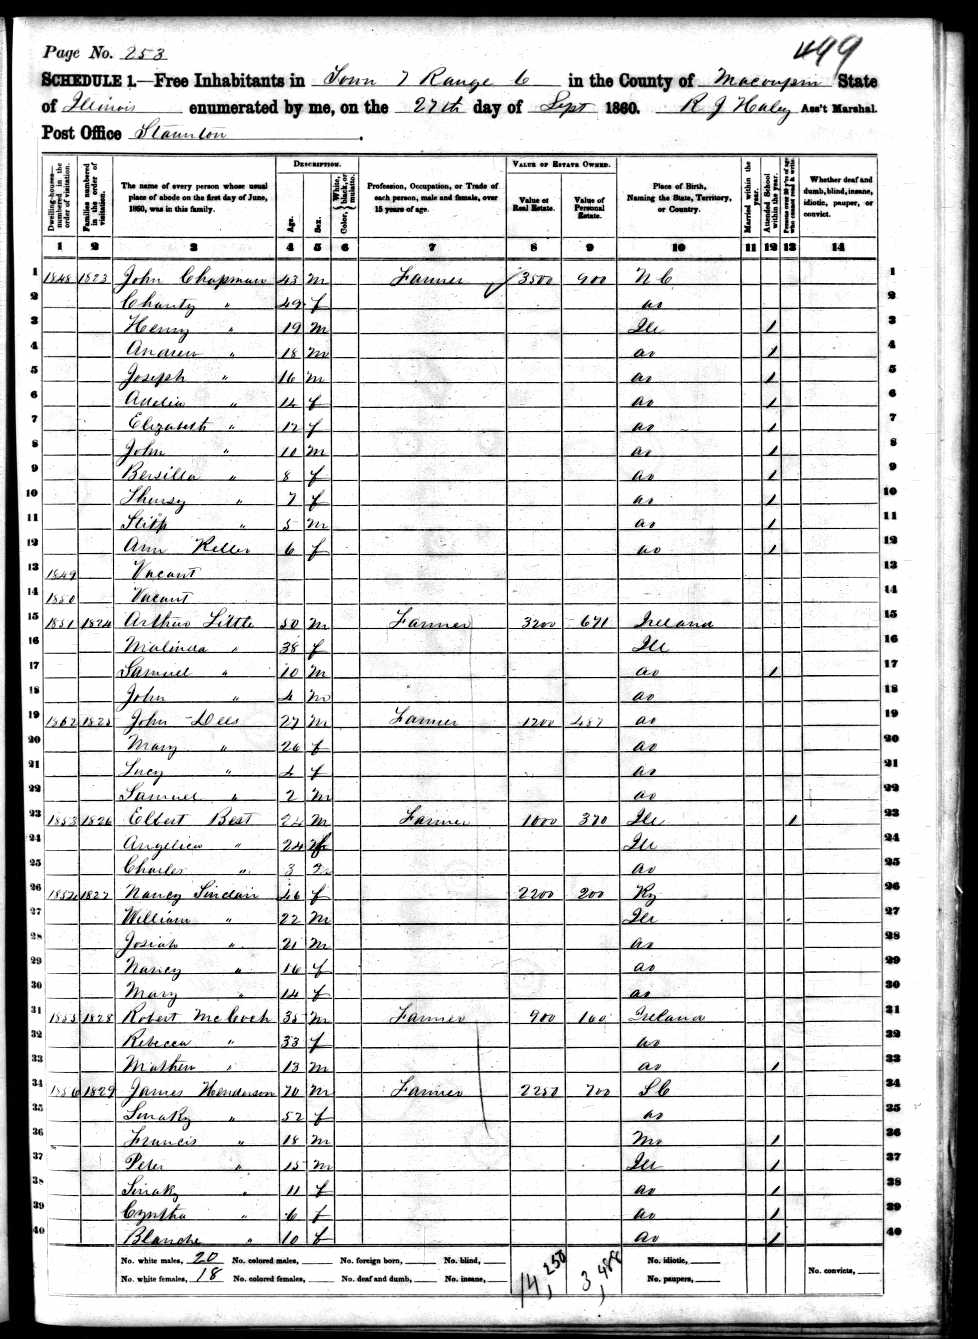 Angelica (Walker) Best, daughter of Philip V. Walker, 1860 Macoupin Co IL census